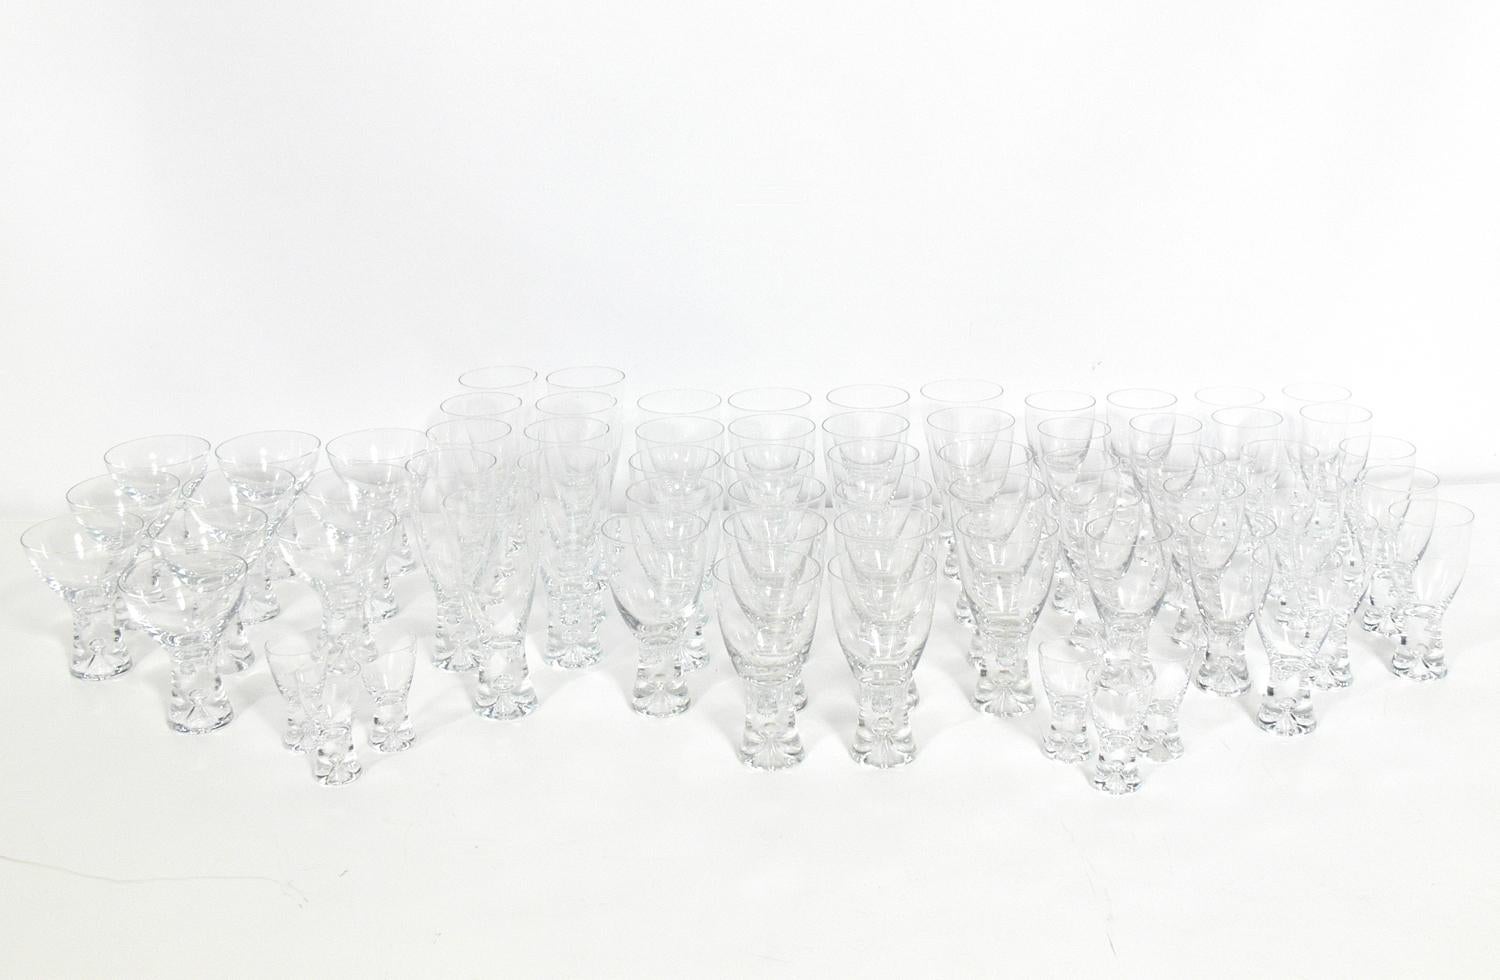 Sculptural glassware set, designed by Tapio Wirkkala for Iitala, Finland, circa 1960s. Very hard to find an original vintage set with this many pieces. This large set consists of 68 pieces total, including six 3.25